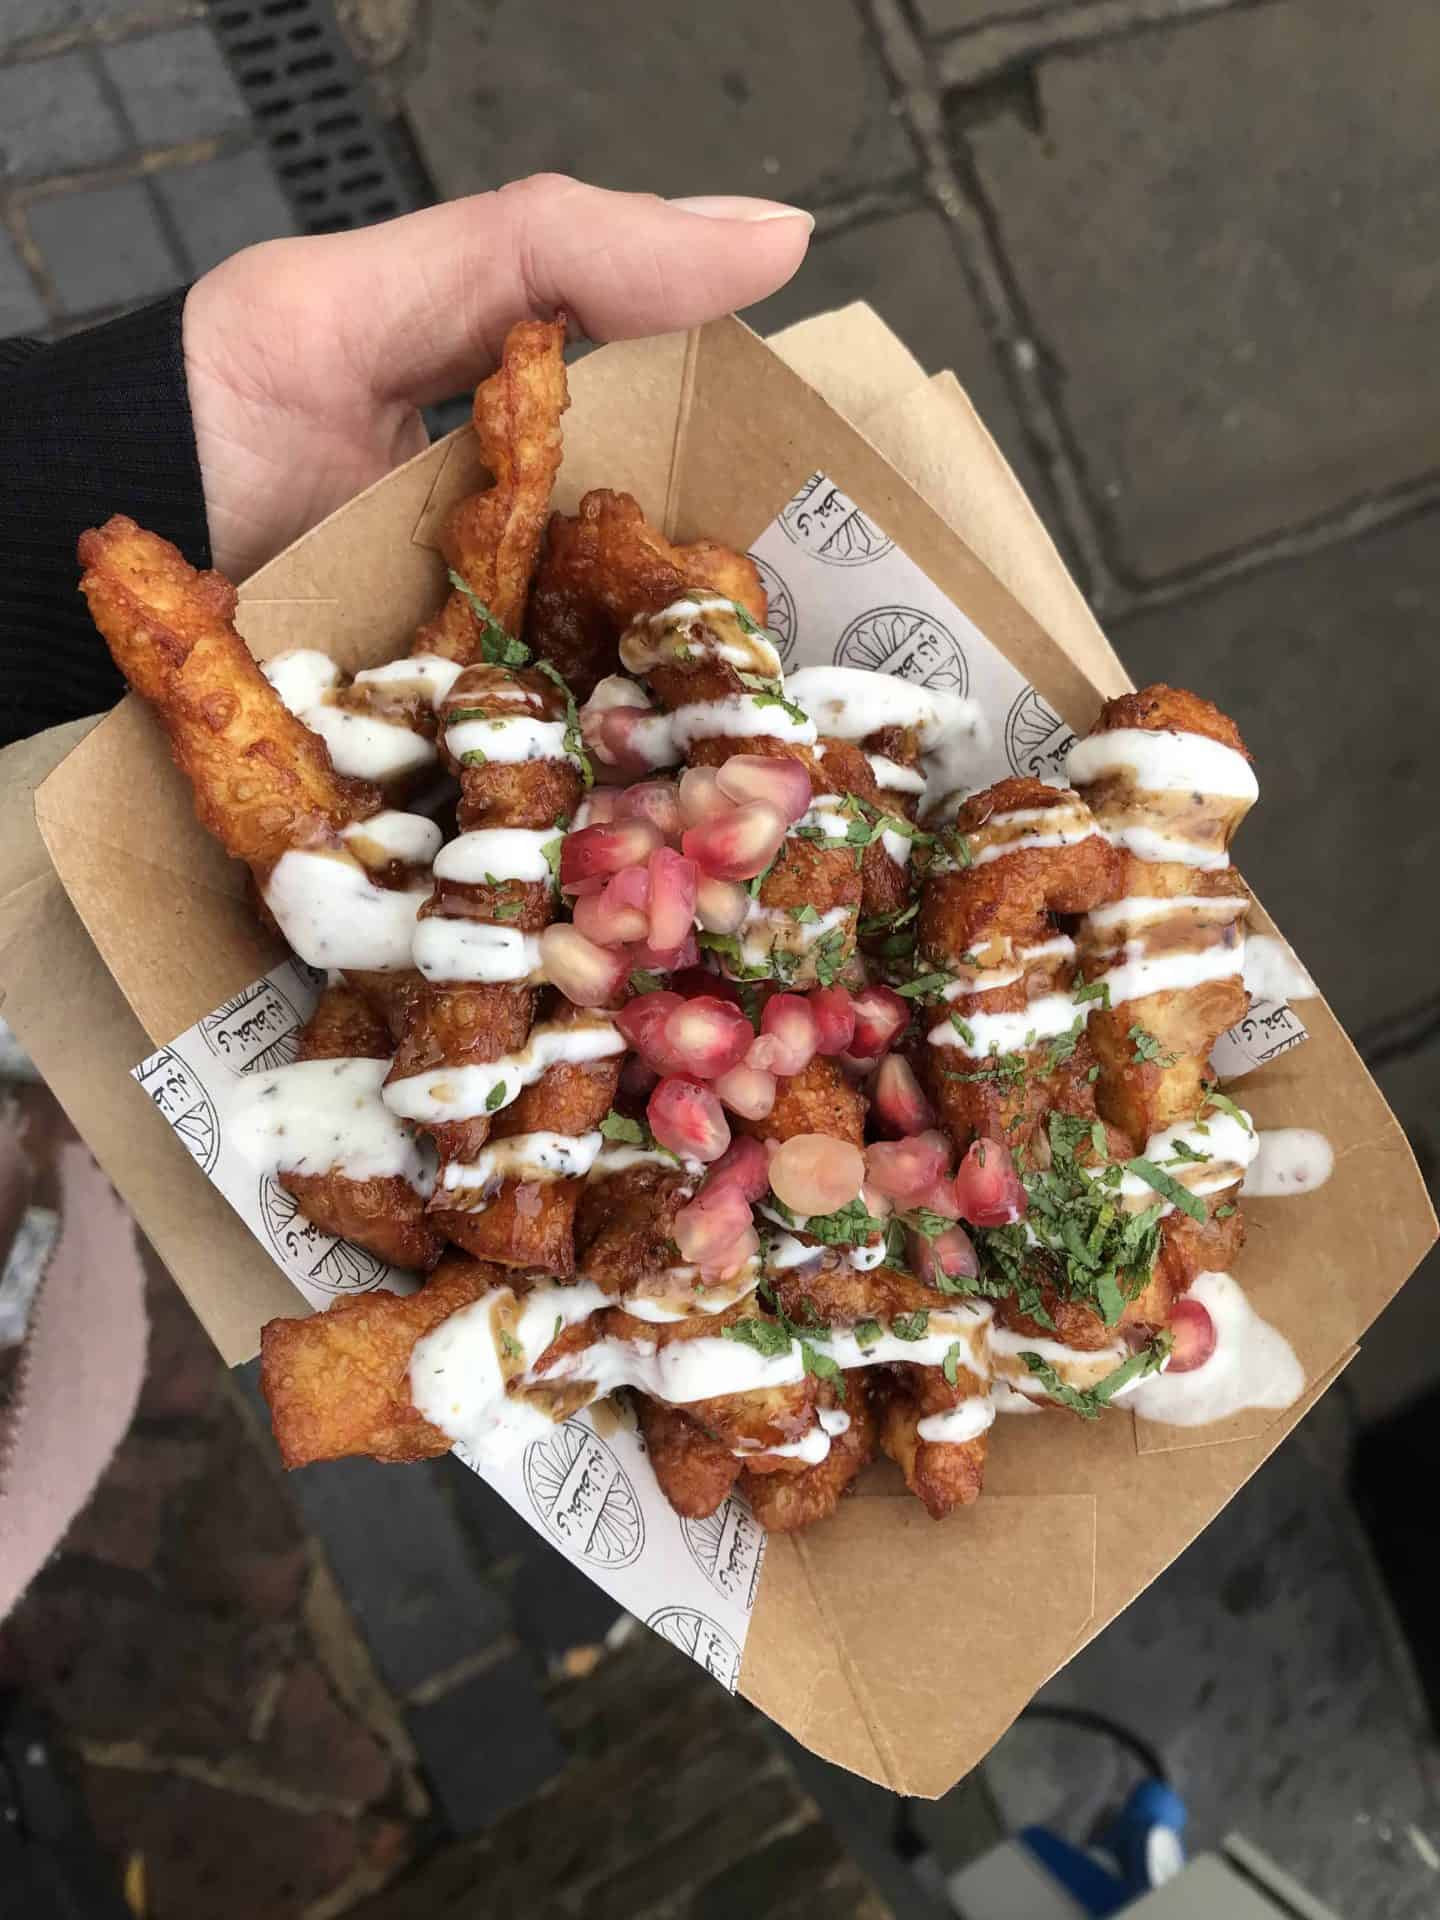 A serving of halloumi fries with sauce and pomegranate.